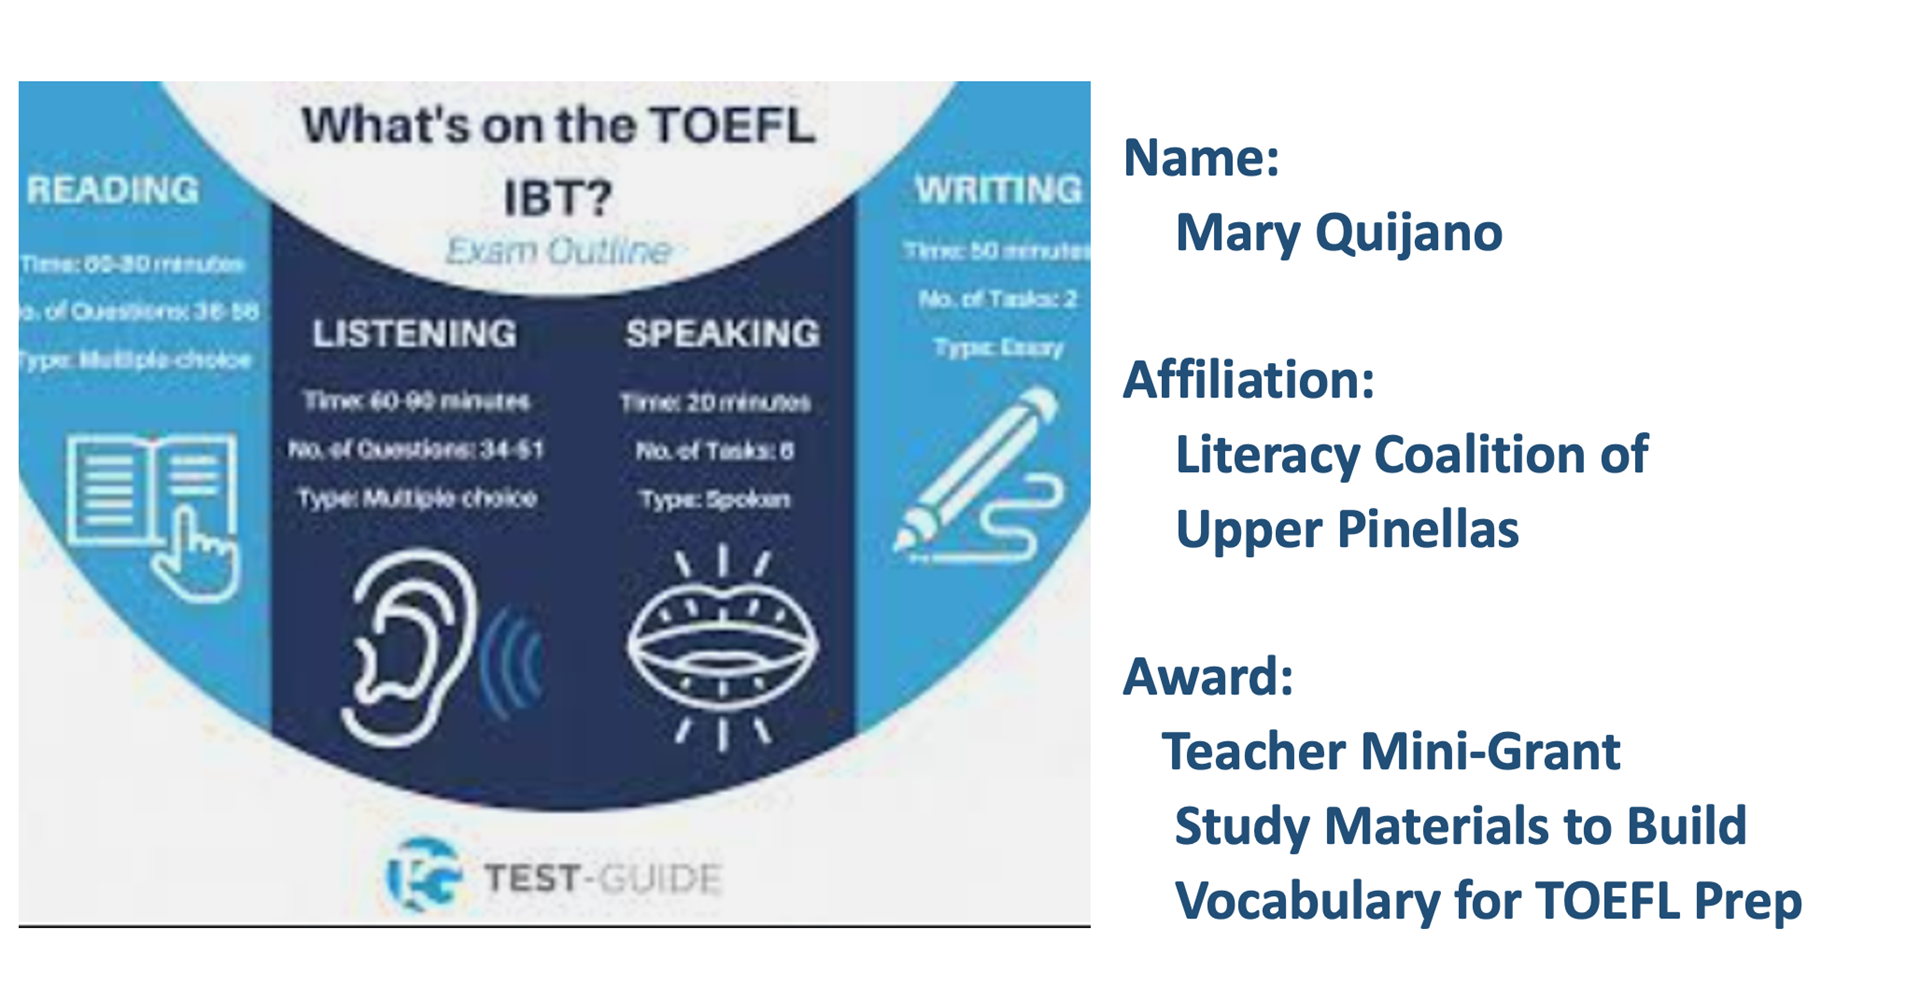 Mary Quijano of the Literacy Coalition of Upper Pinellas. Awarded a Teacher Mini-Grant for Study Materials to Build Vocabulary for TOEFL Prep.